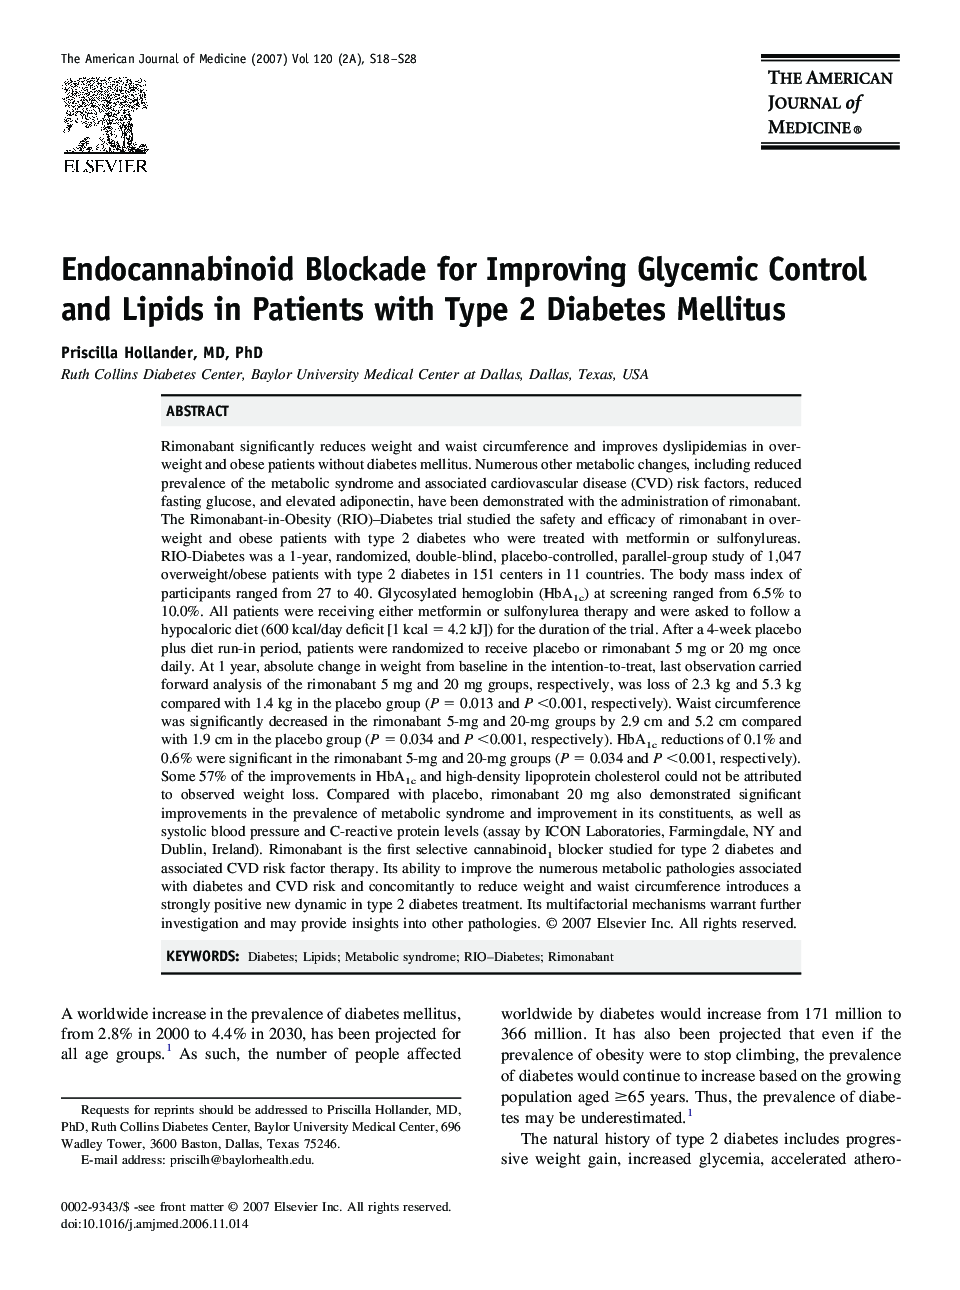 Endocannabinoid Blockade for Improving Glycemic Control and Lipids in Patients with Type 2 Diabetes Mellitus